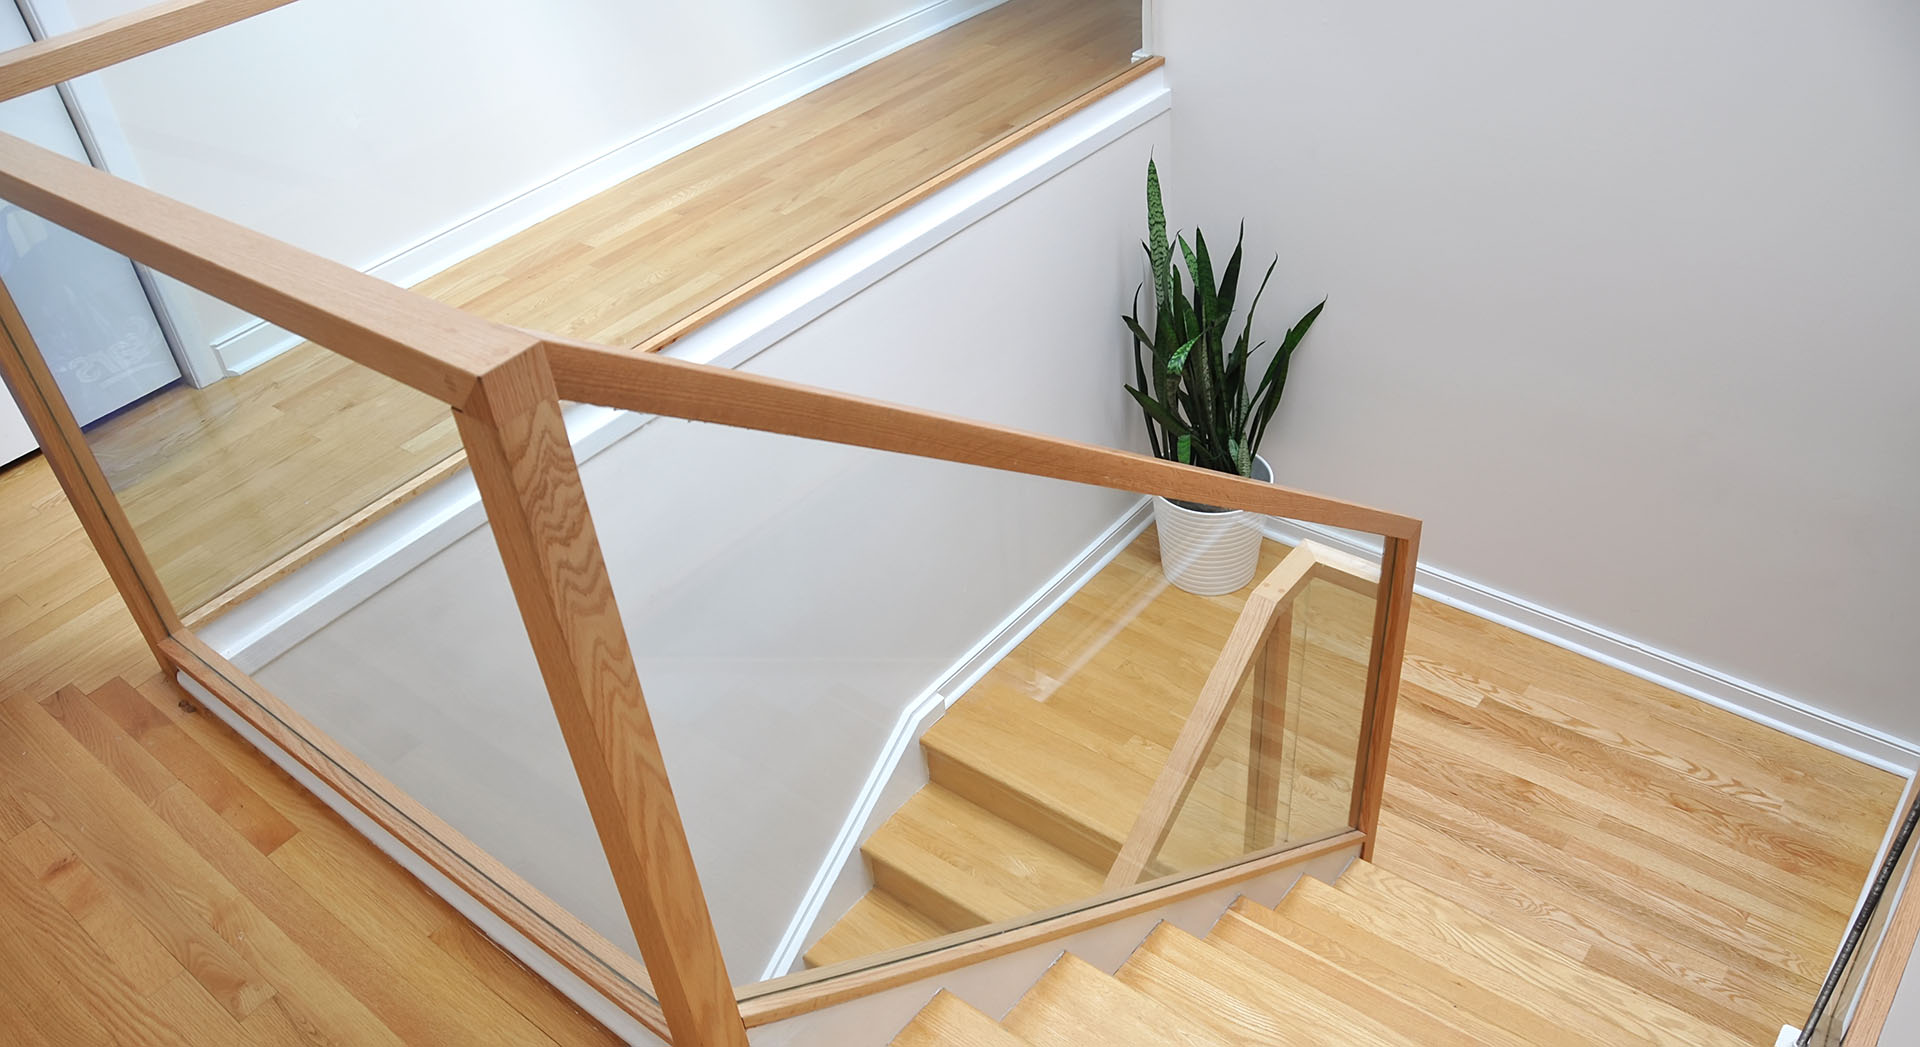 Campbell's Woodcraft Ottawa Stairs, Handrails, Recaps, Cabinetry, Furniture, Custom Woodwork.